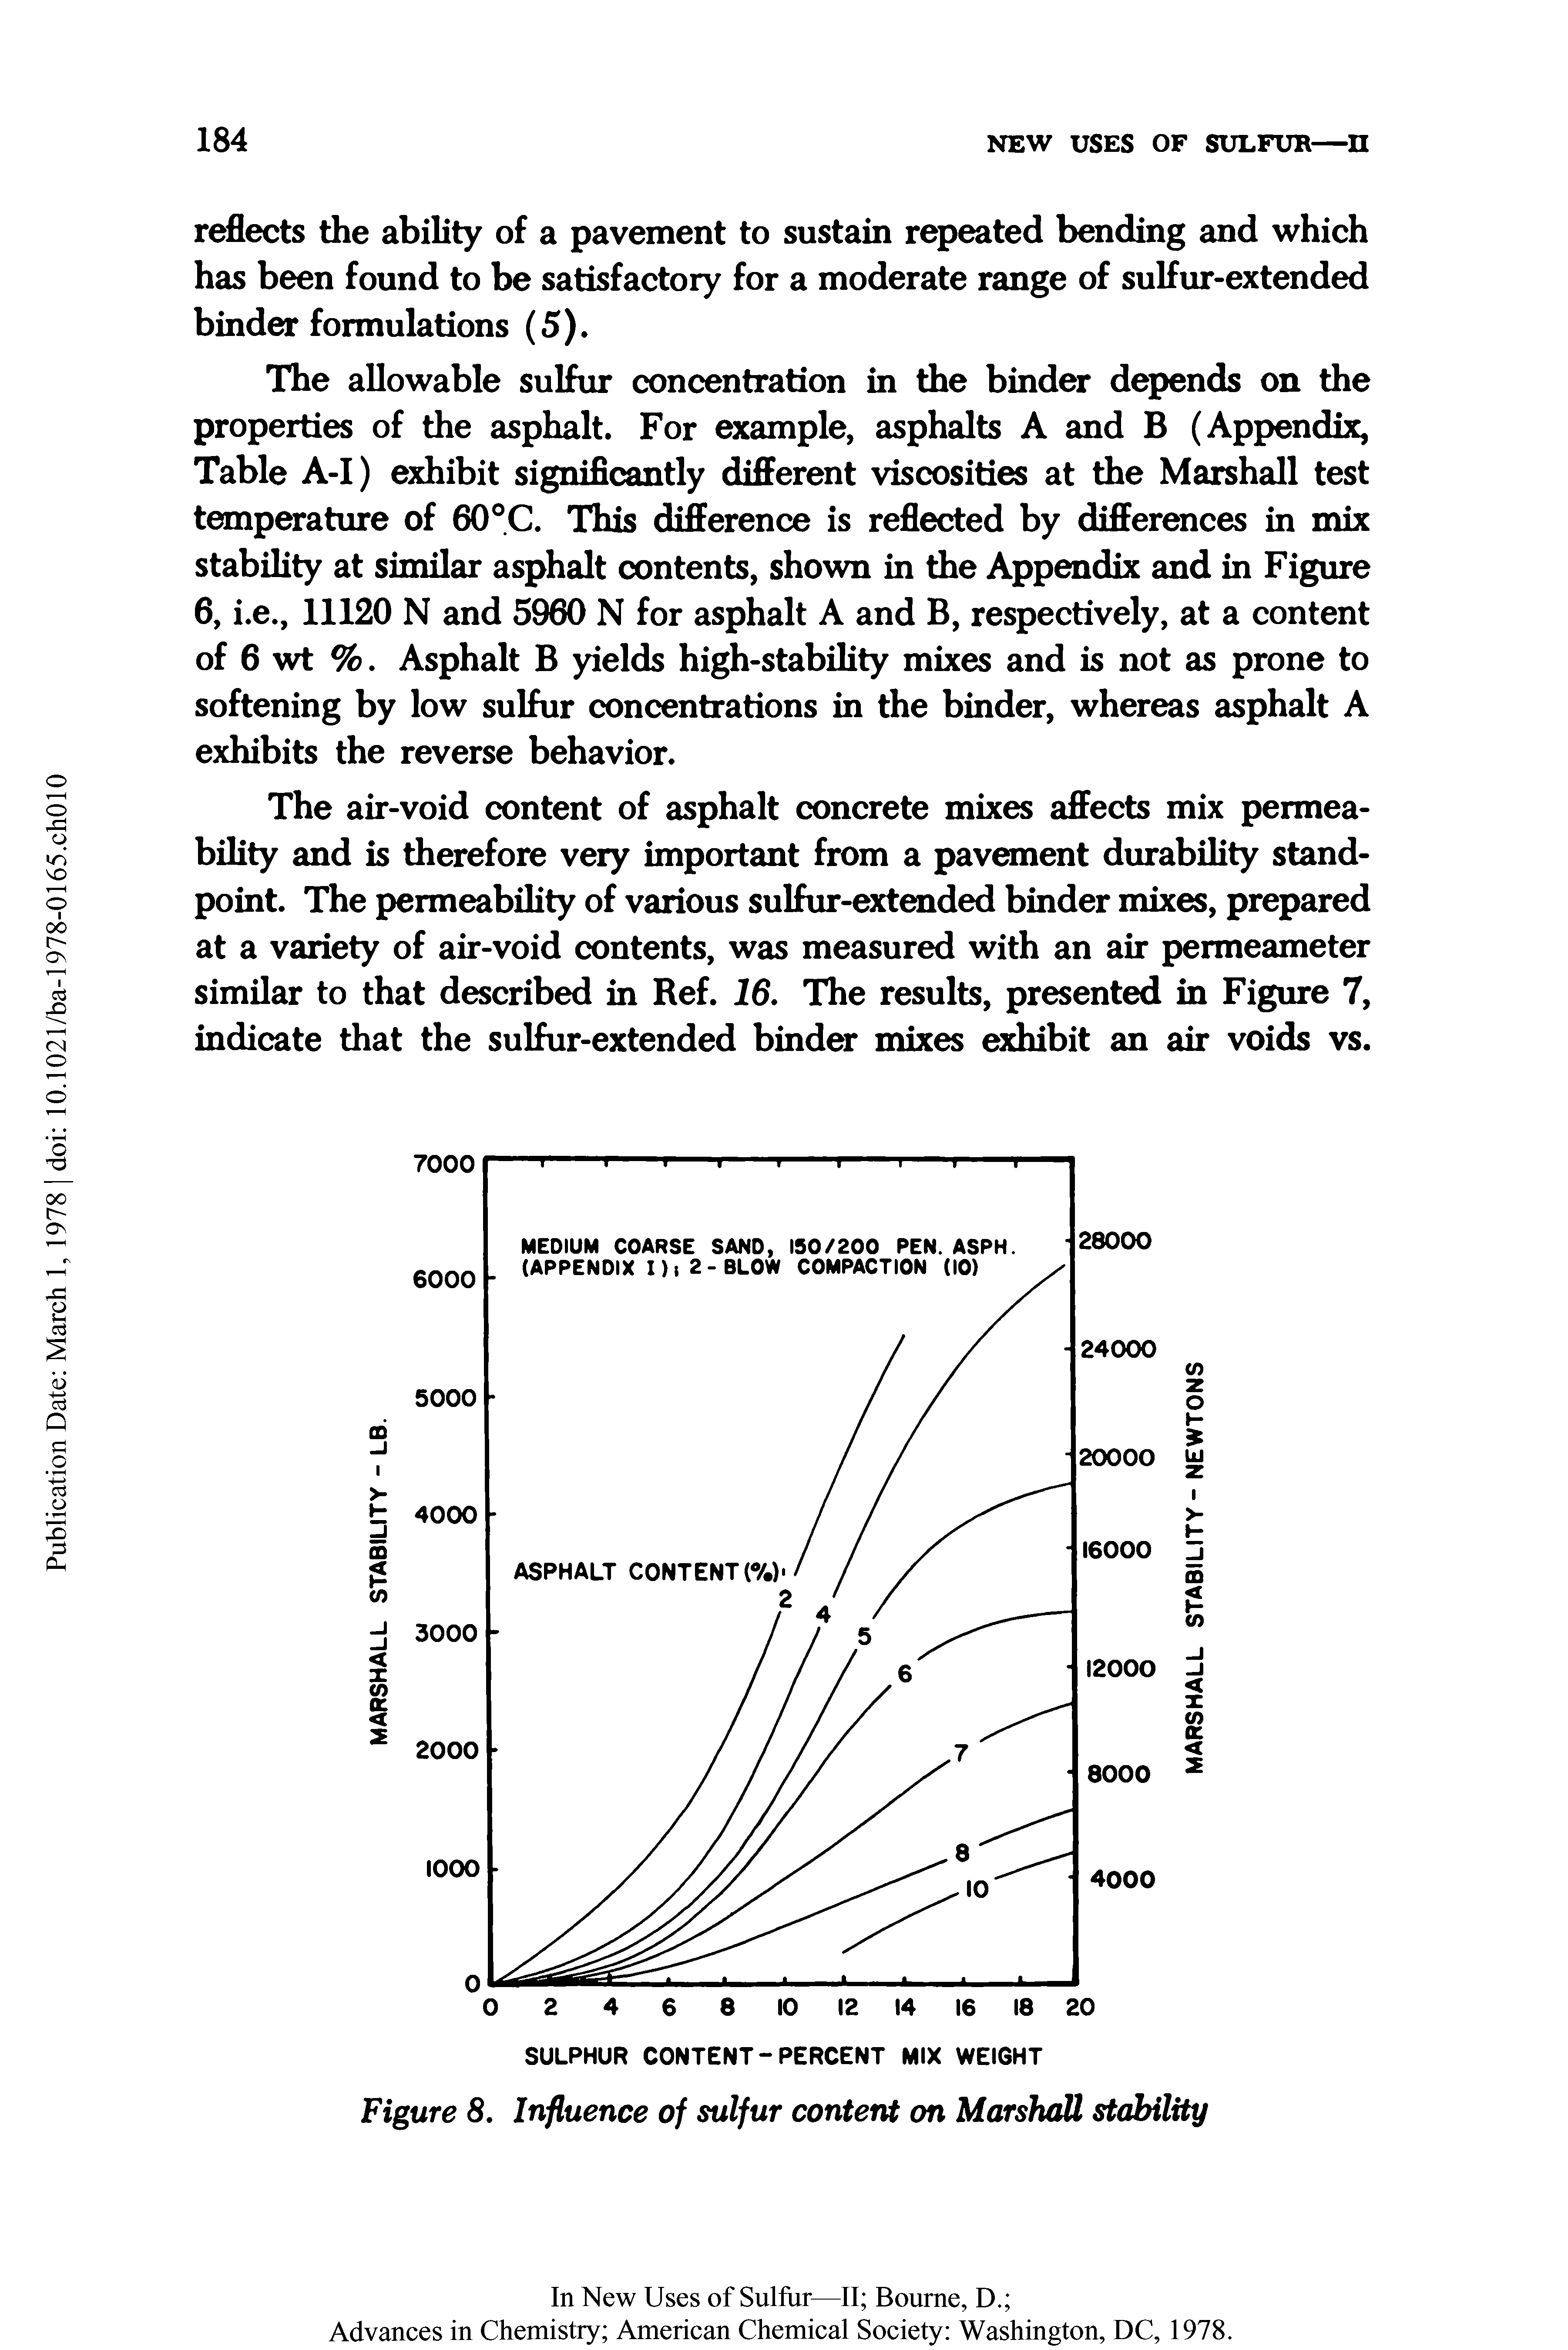 Figure 8. Influence of sulfur content on Marshall stability...